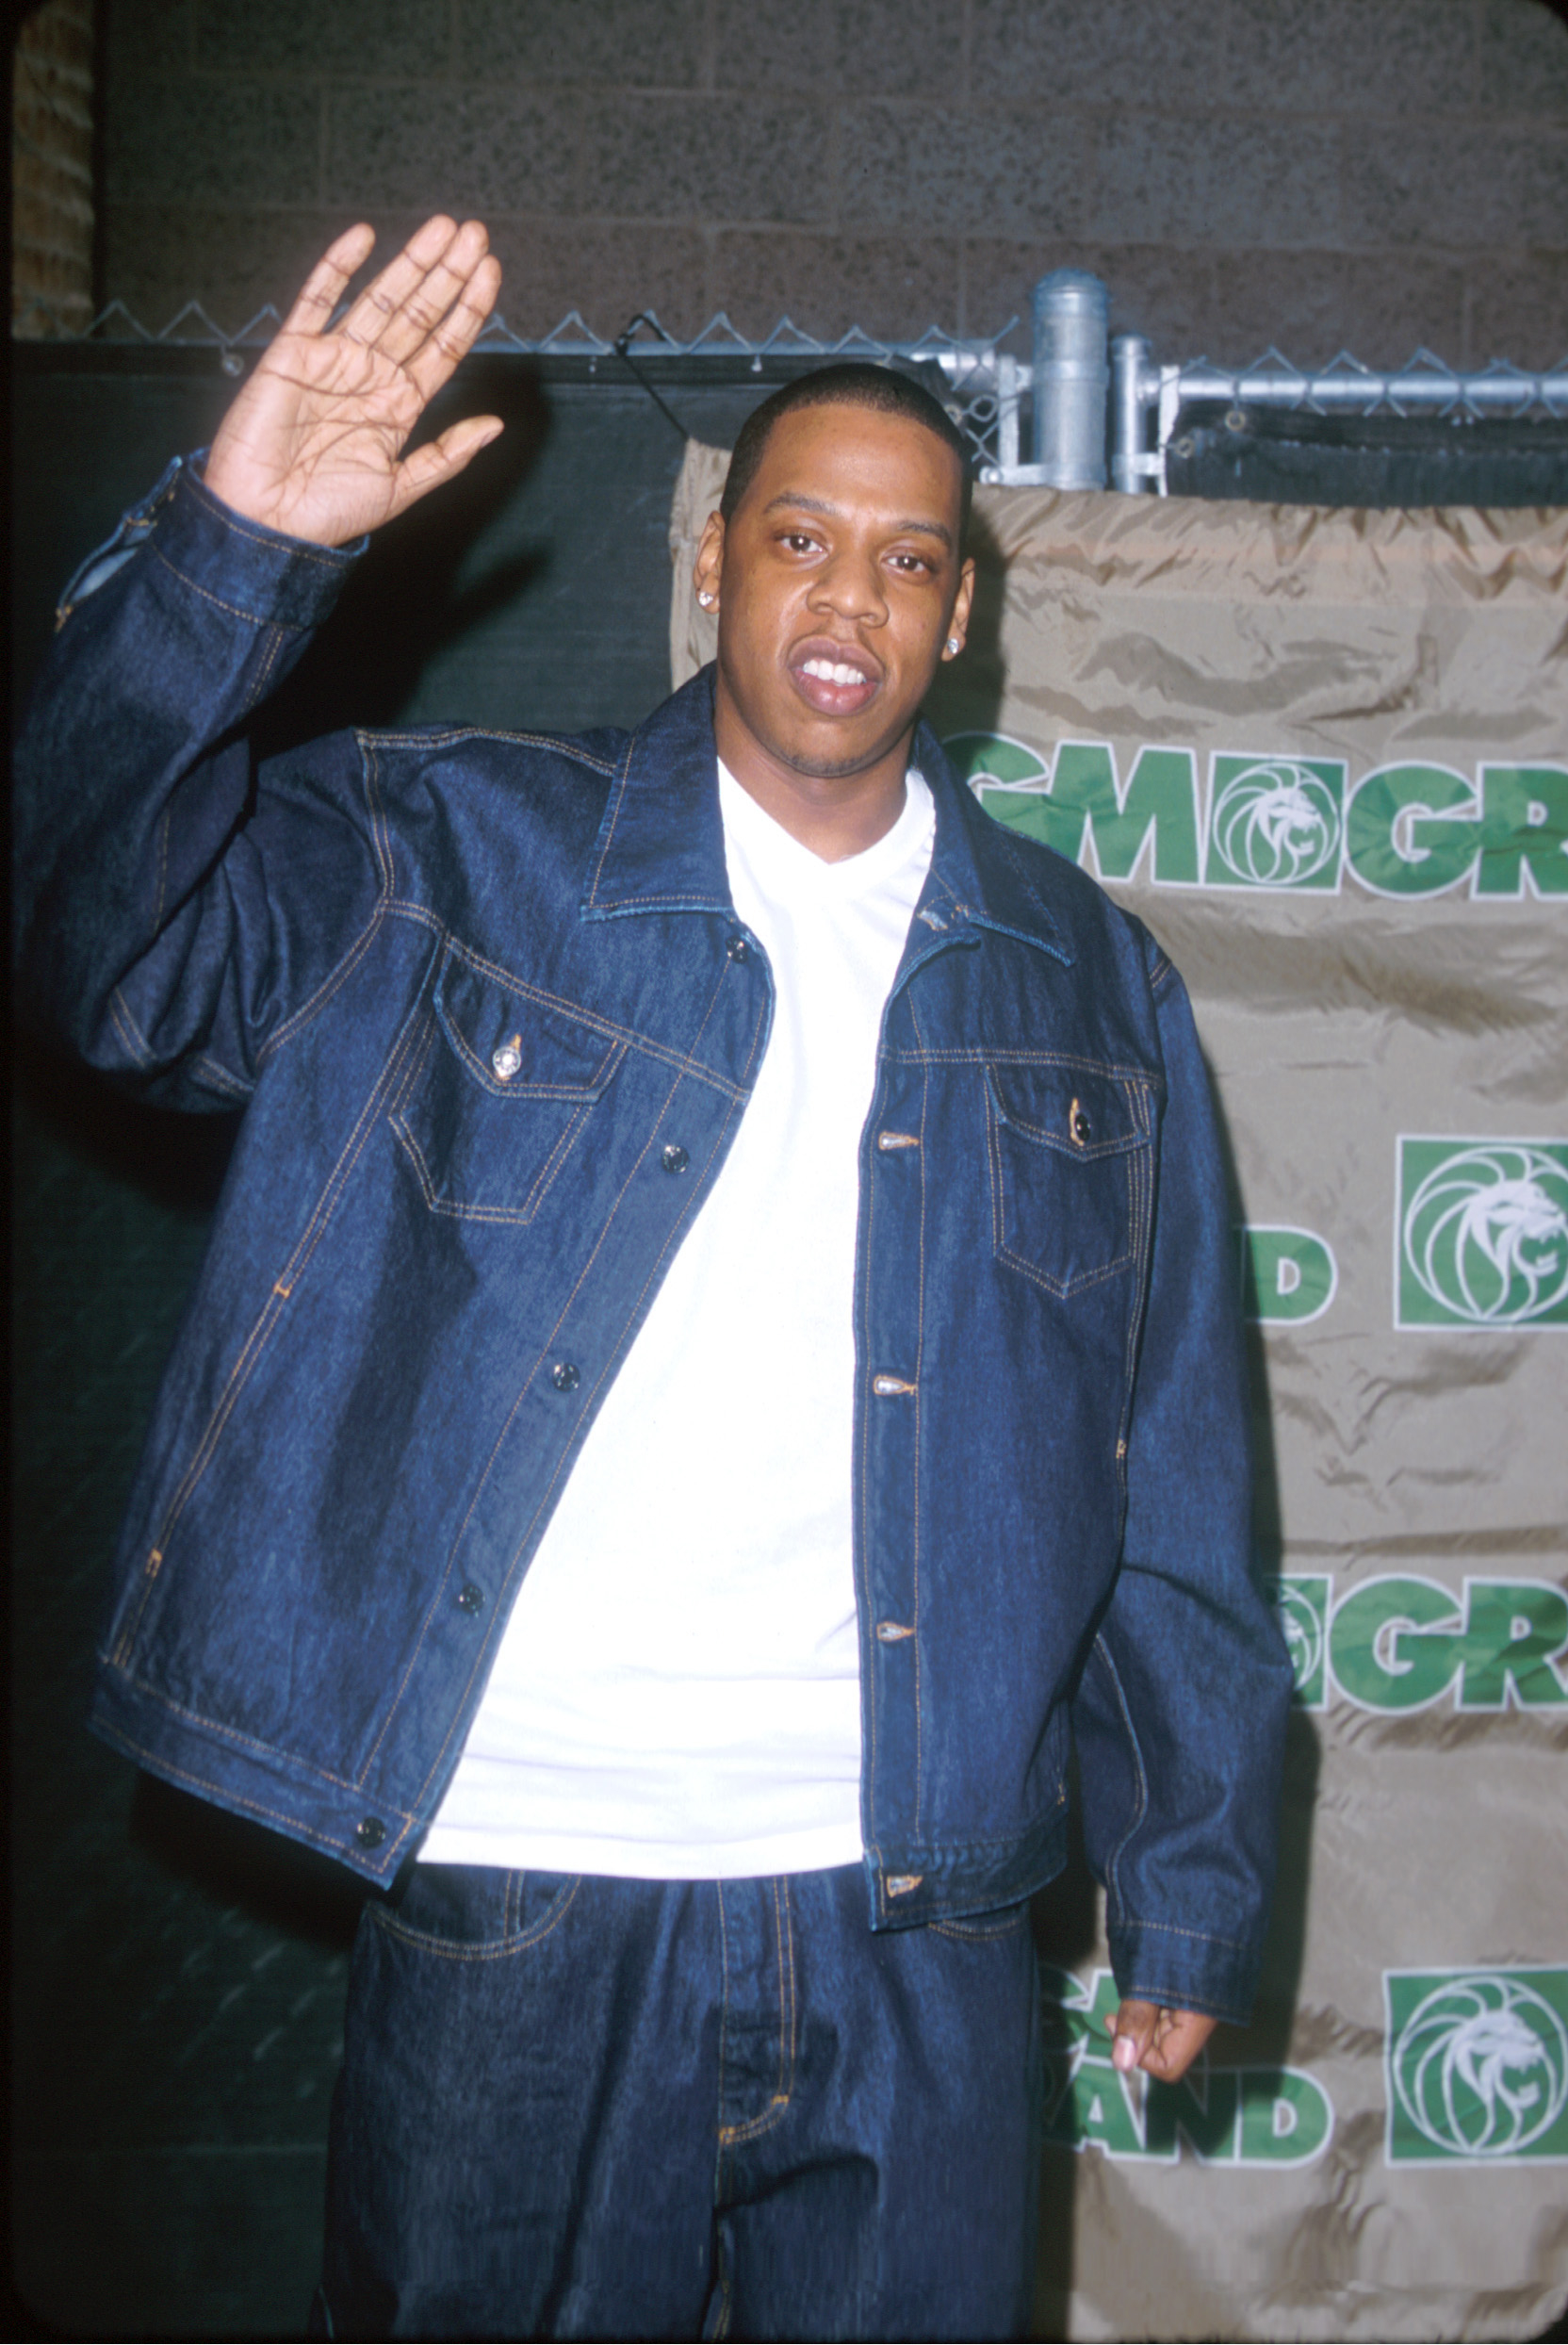 Jay-Z in a denim jacket, waving, with a backdrop featuring multiple logos